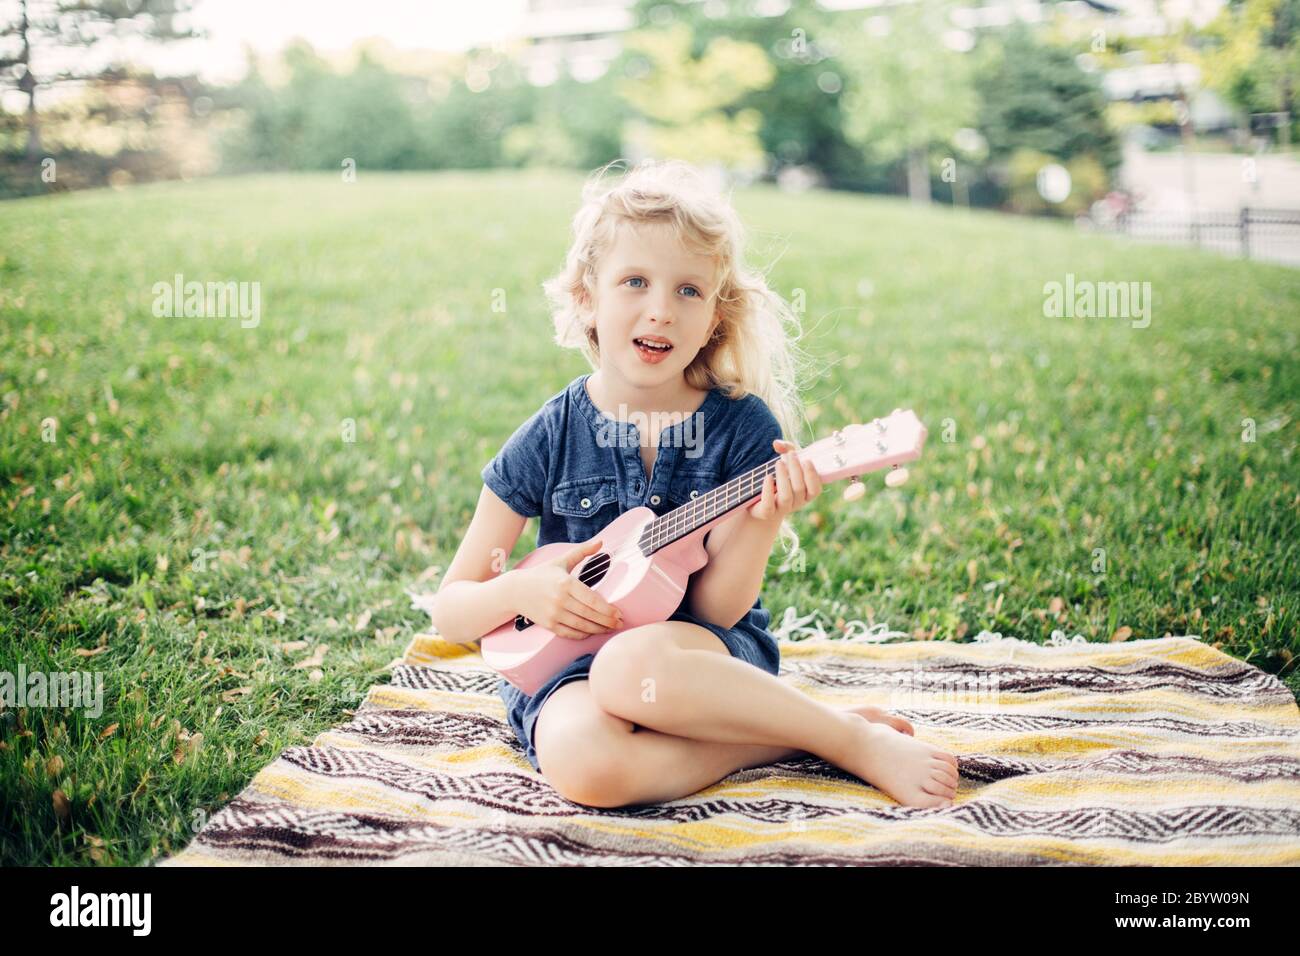 Cute adorable blonde girl playing pink guitar toy outdoor. Child playing music and singing song in park. Hobby activity for children kids. Tender memo Stock Photo